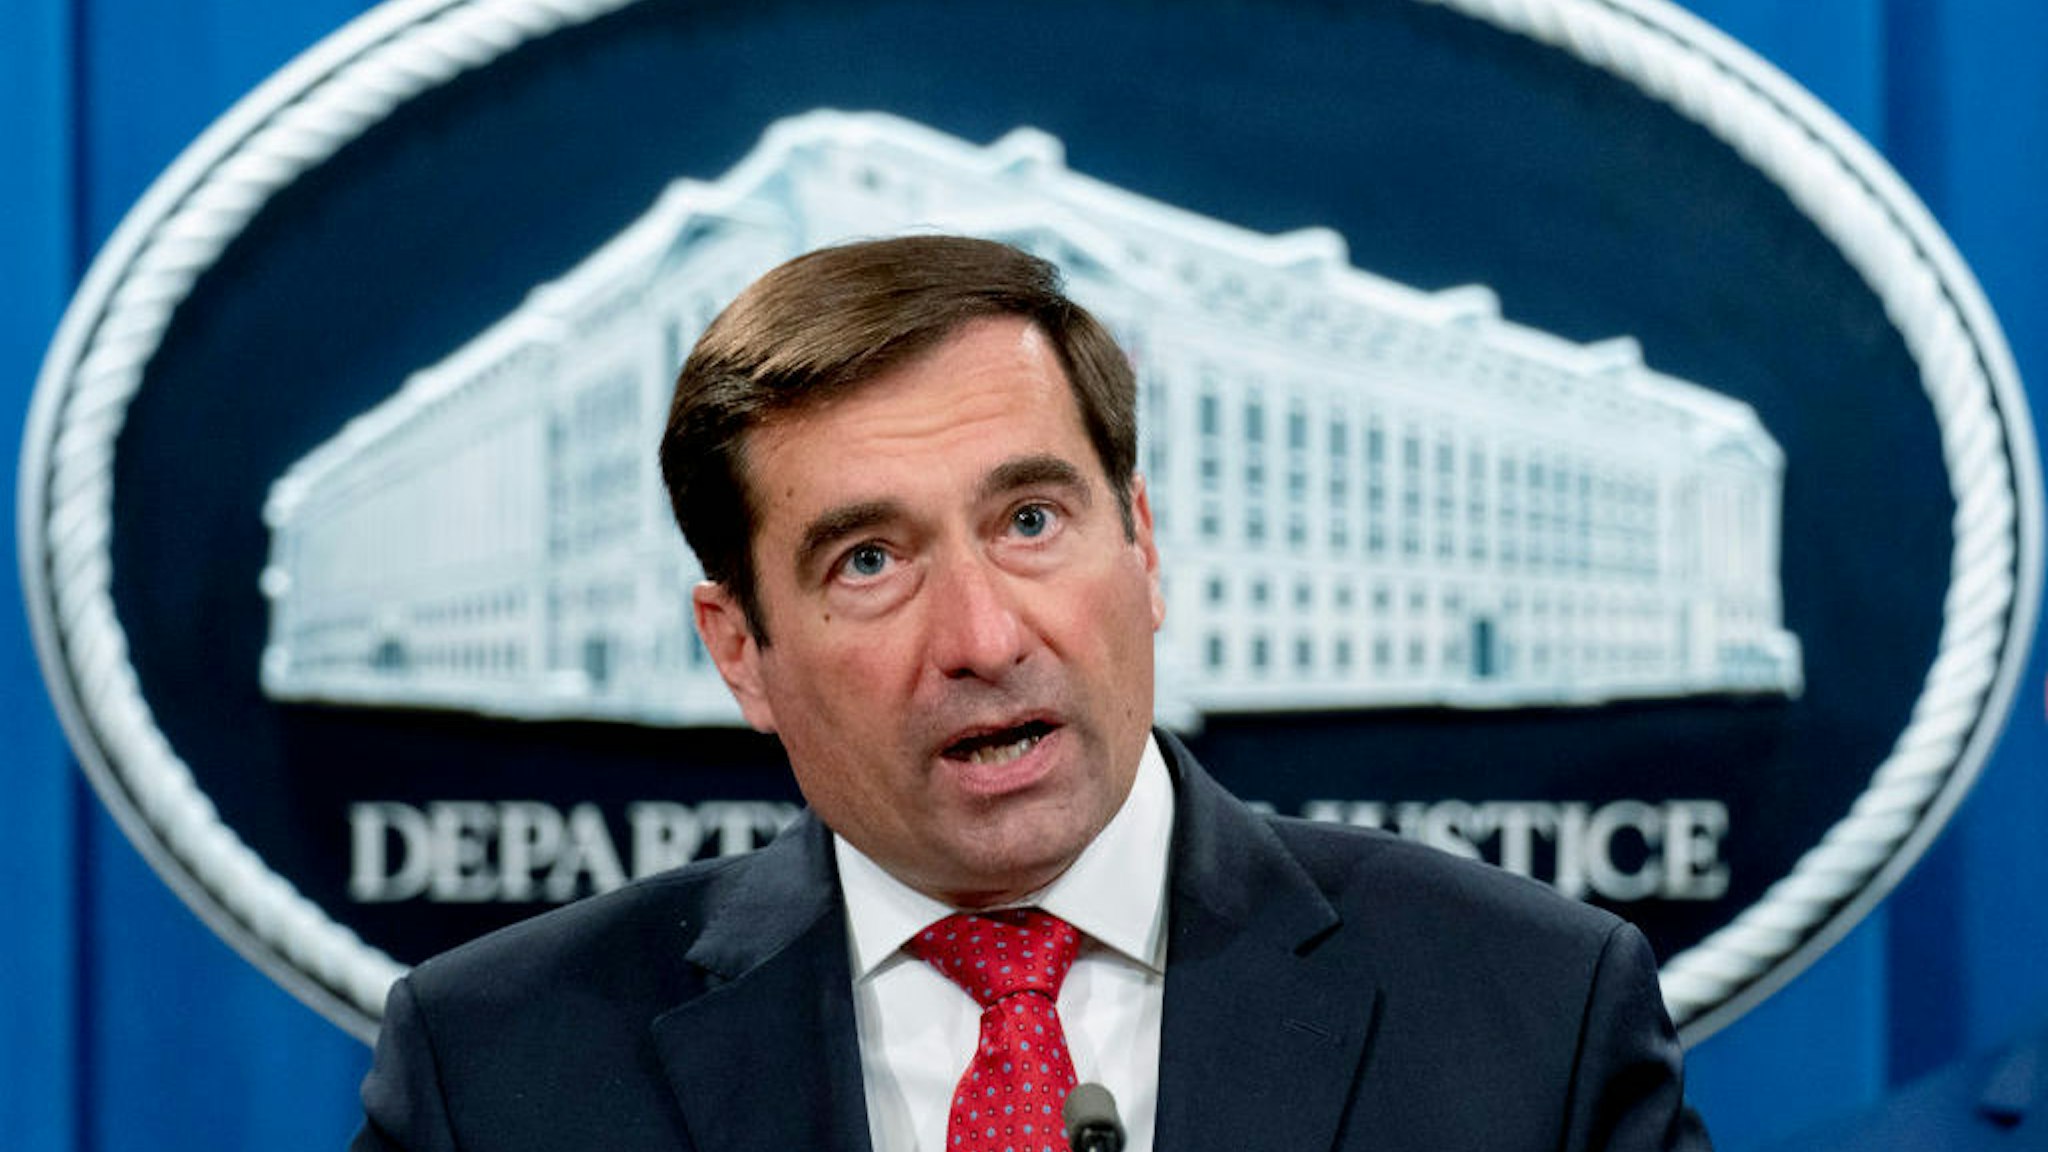 Assistant Attorney General for the National Security Division John Demers speaks at a news conference at the Department of Justice, Monday, Oct. 19, 2020, in Washington. (AP Photo/Andrew Harnik, pool)